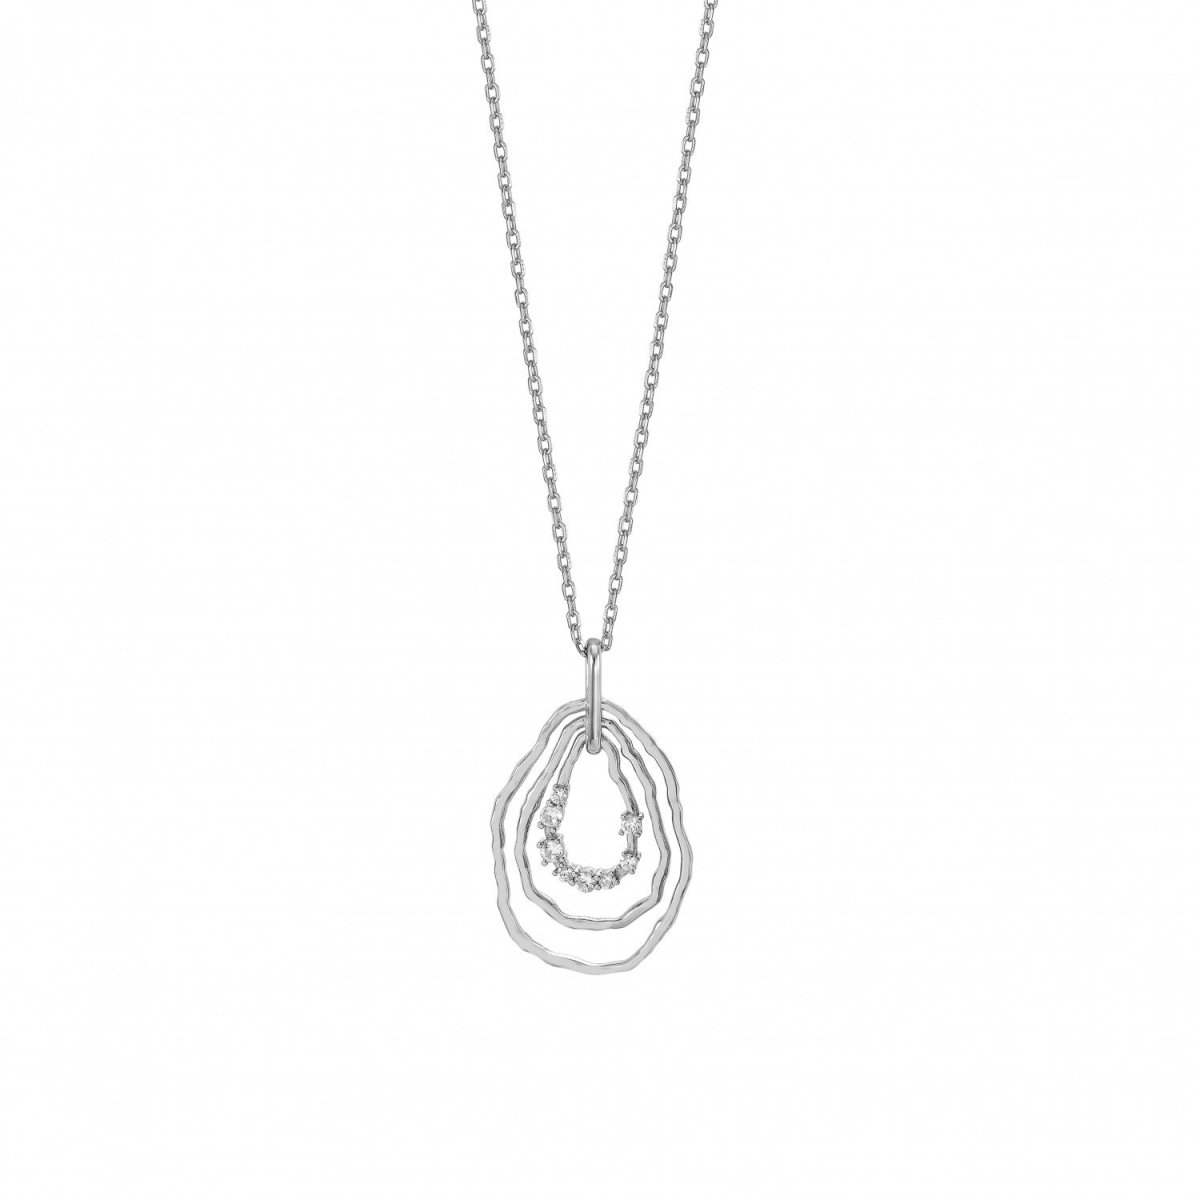 Necklaces - Necklaces with oval pendants and zirconia sparkles